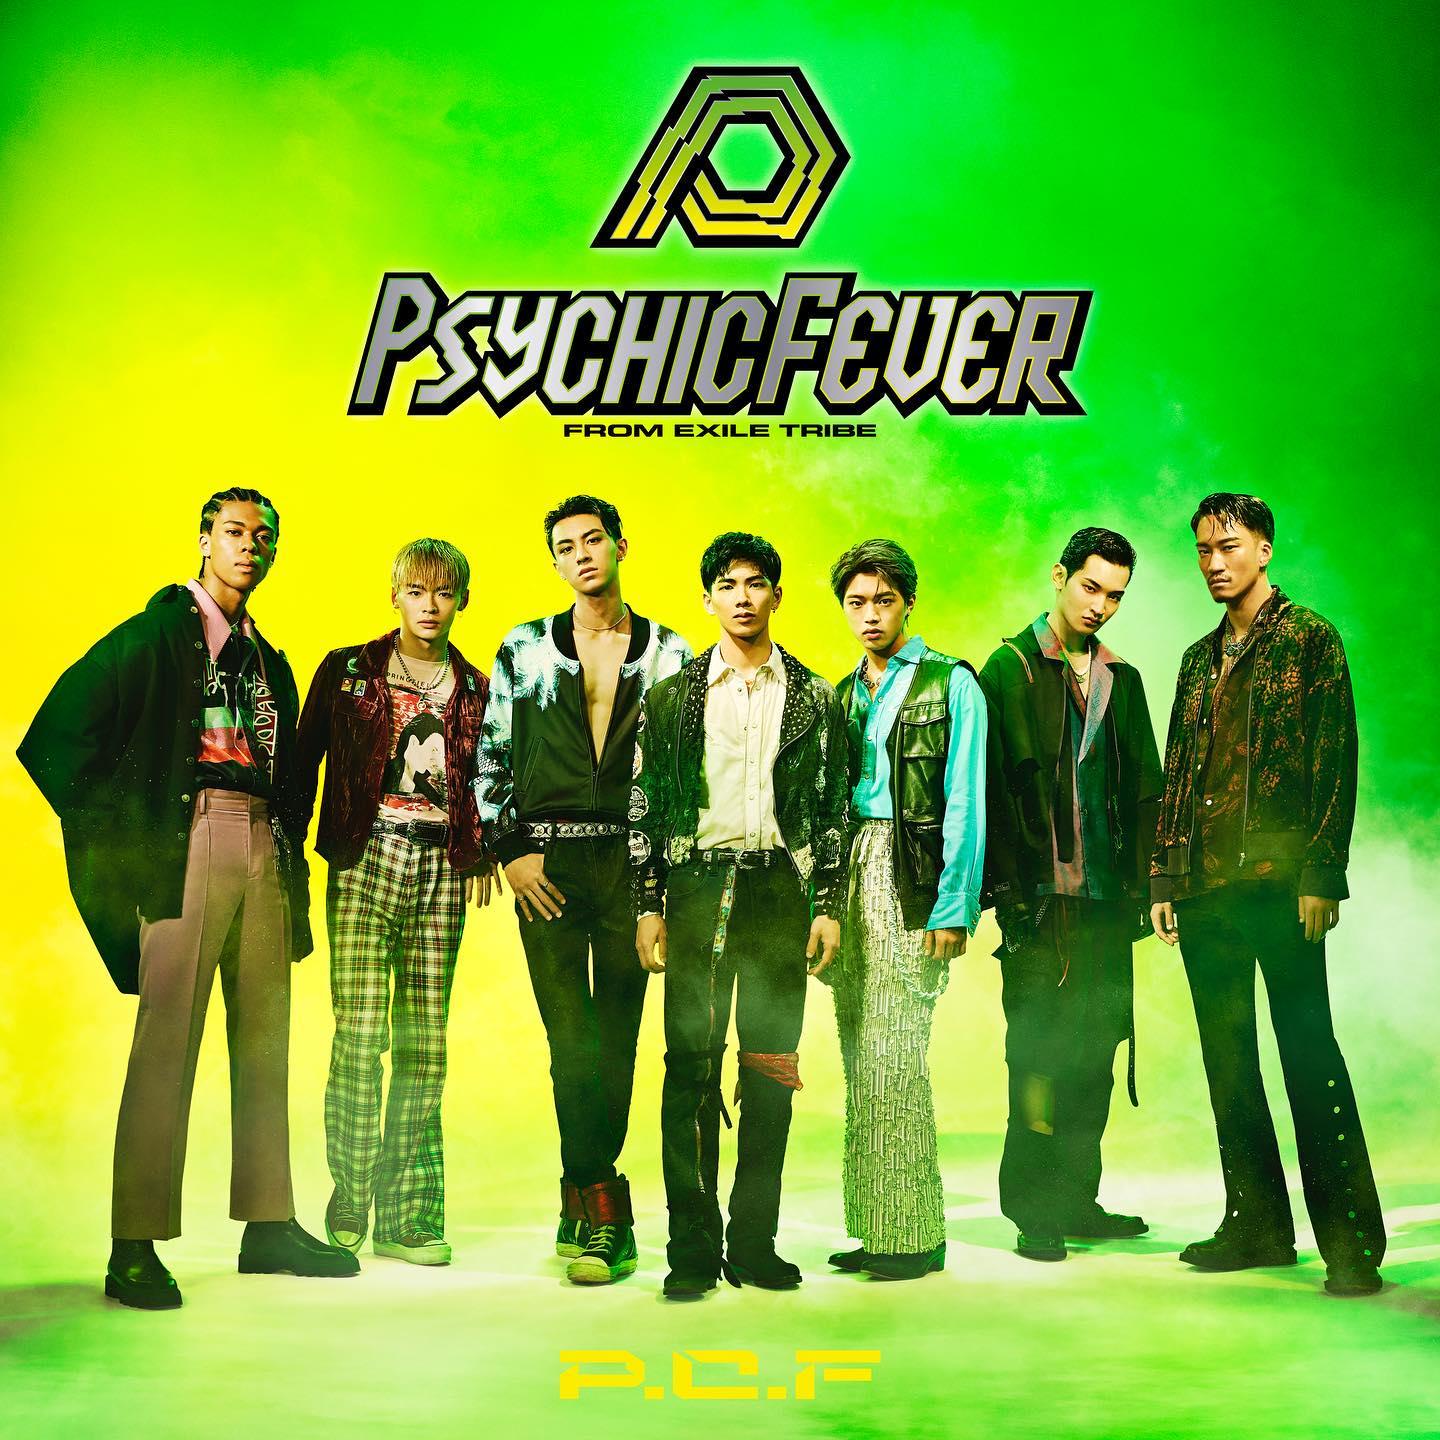 Psychic Fever From Exile Tribe - Songs, Events and Music Stats